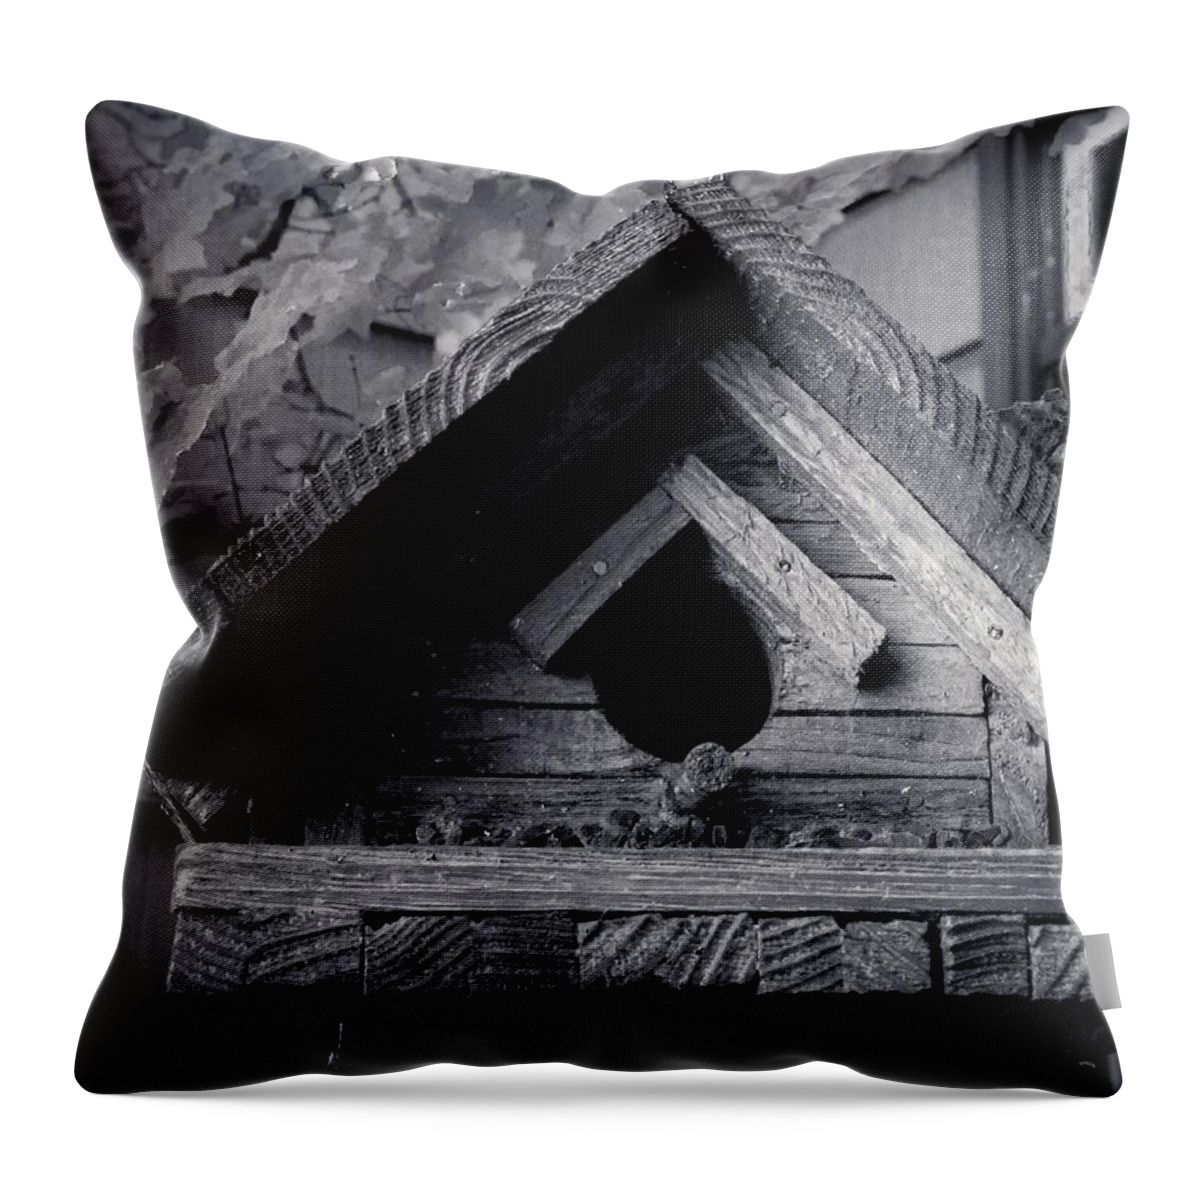 Bird House Throw Pillow featuring the photograph Bird House by Anamar Pictures